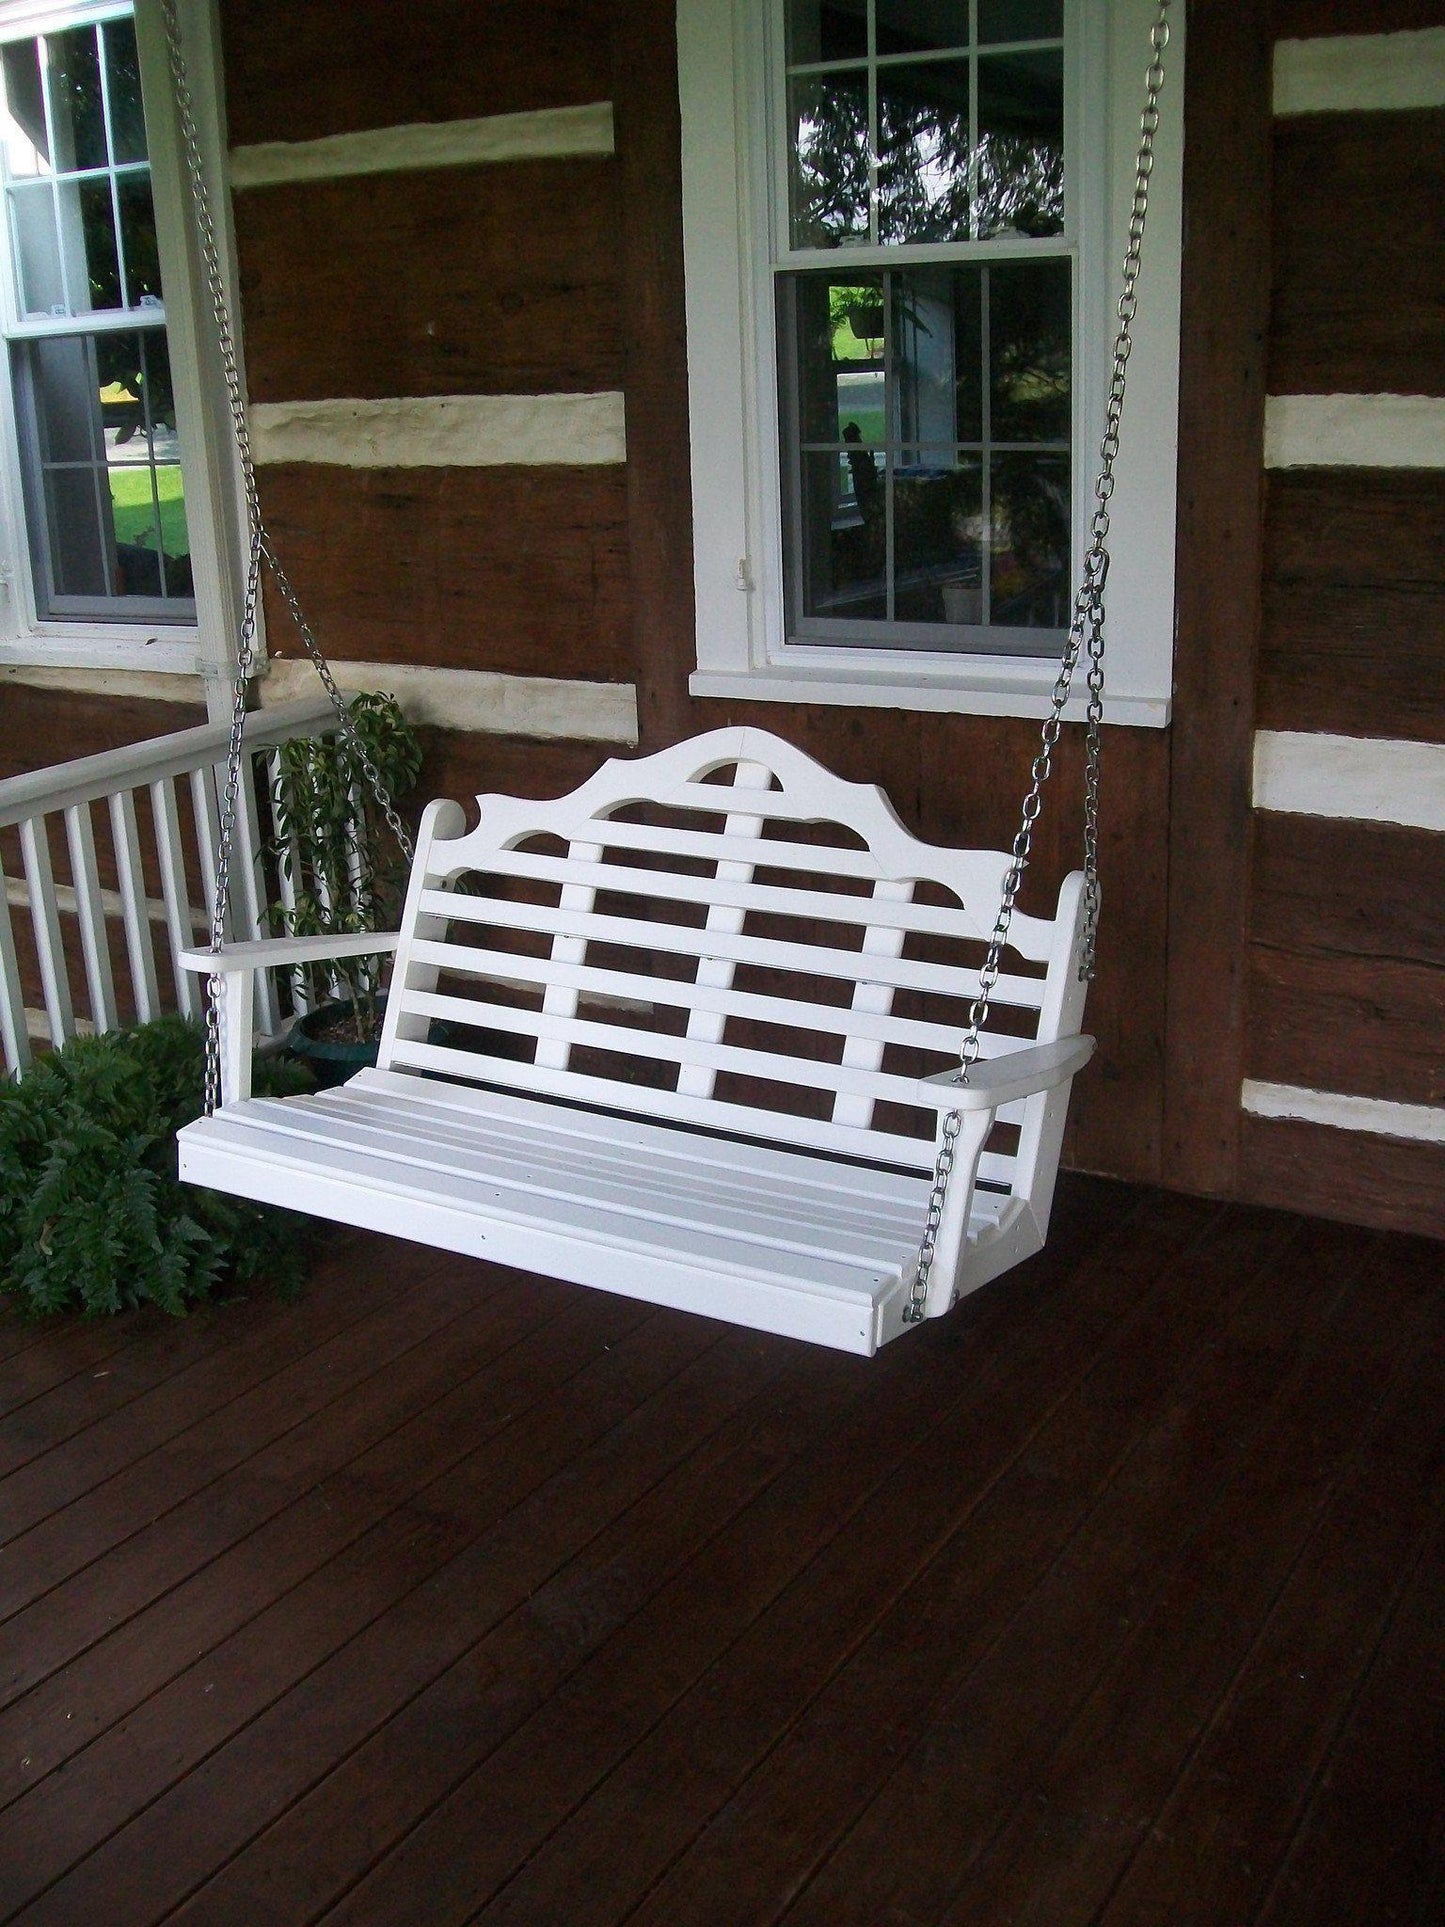 Porch Swing - A&L Furniture Company Marlboro Recycled Plastic 4ft Porch Swing